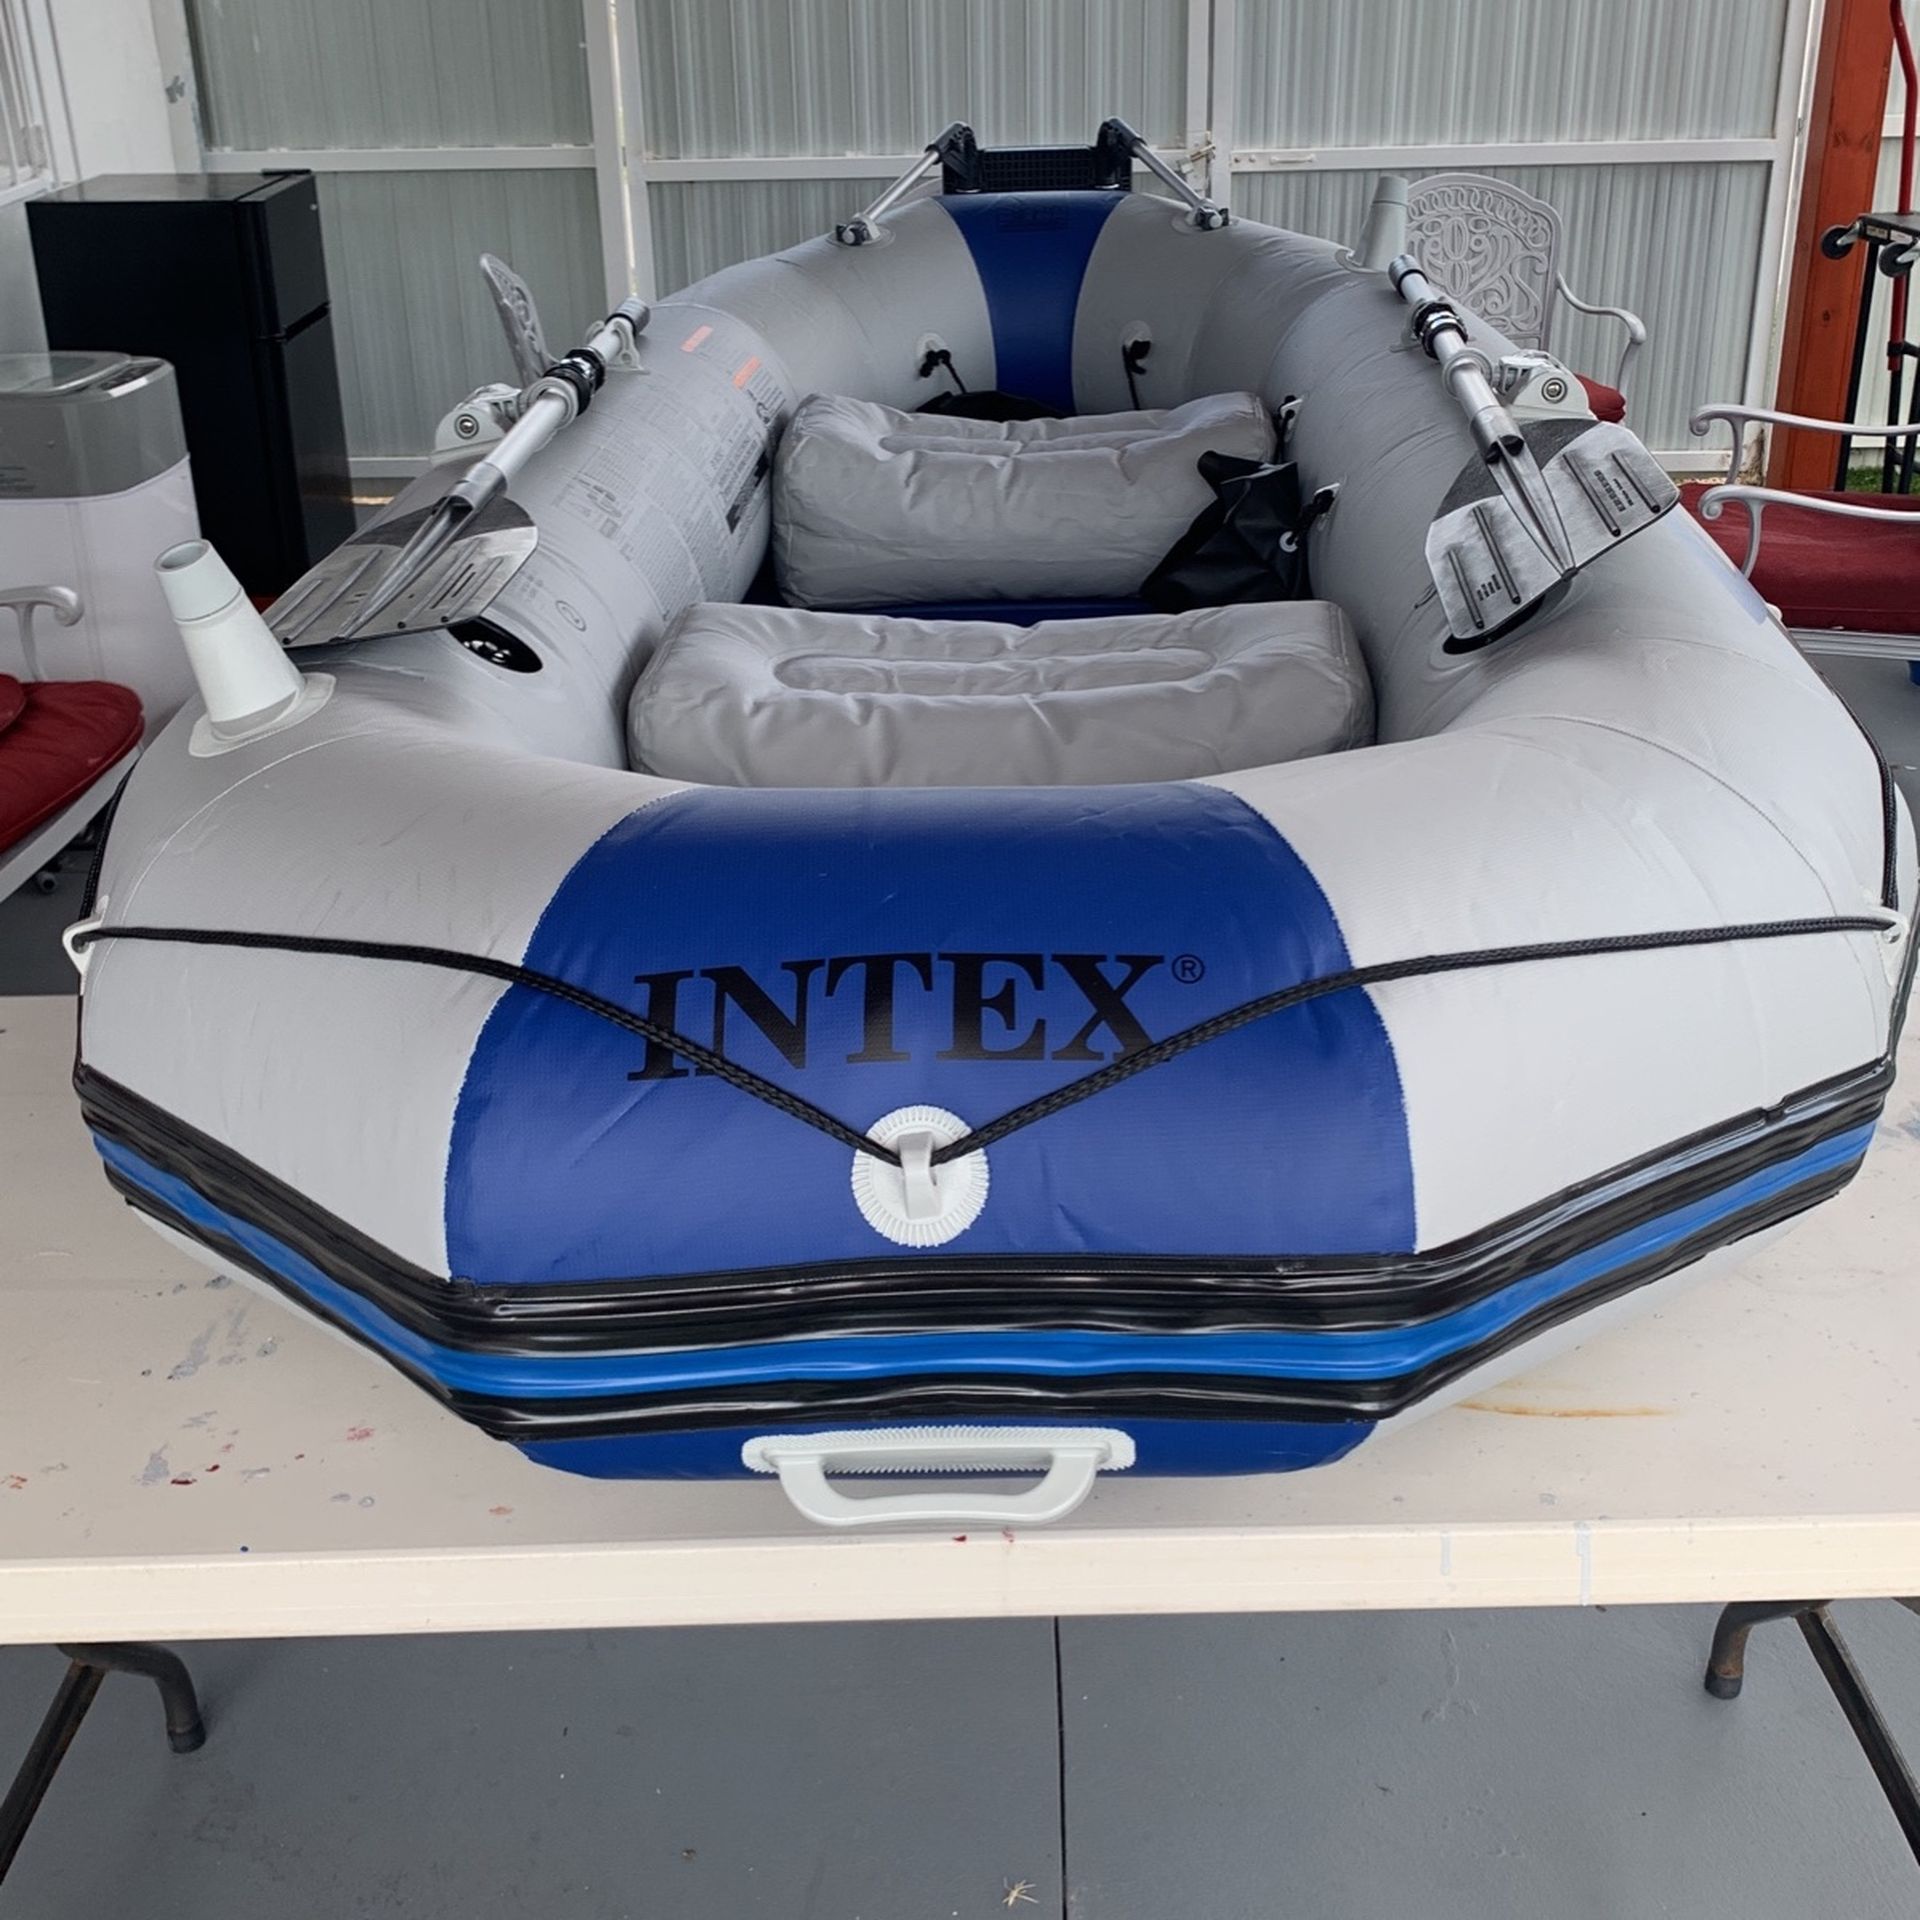 10 Foot Inflatable Boat